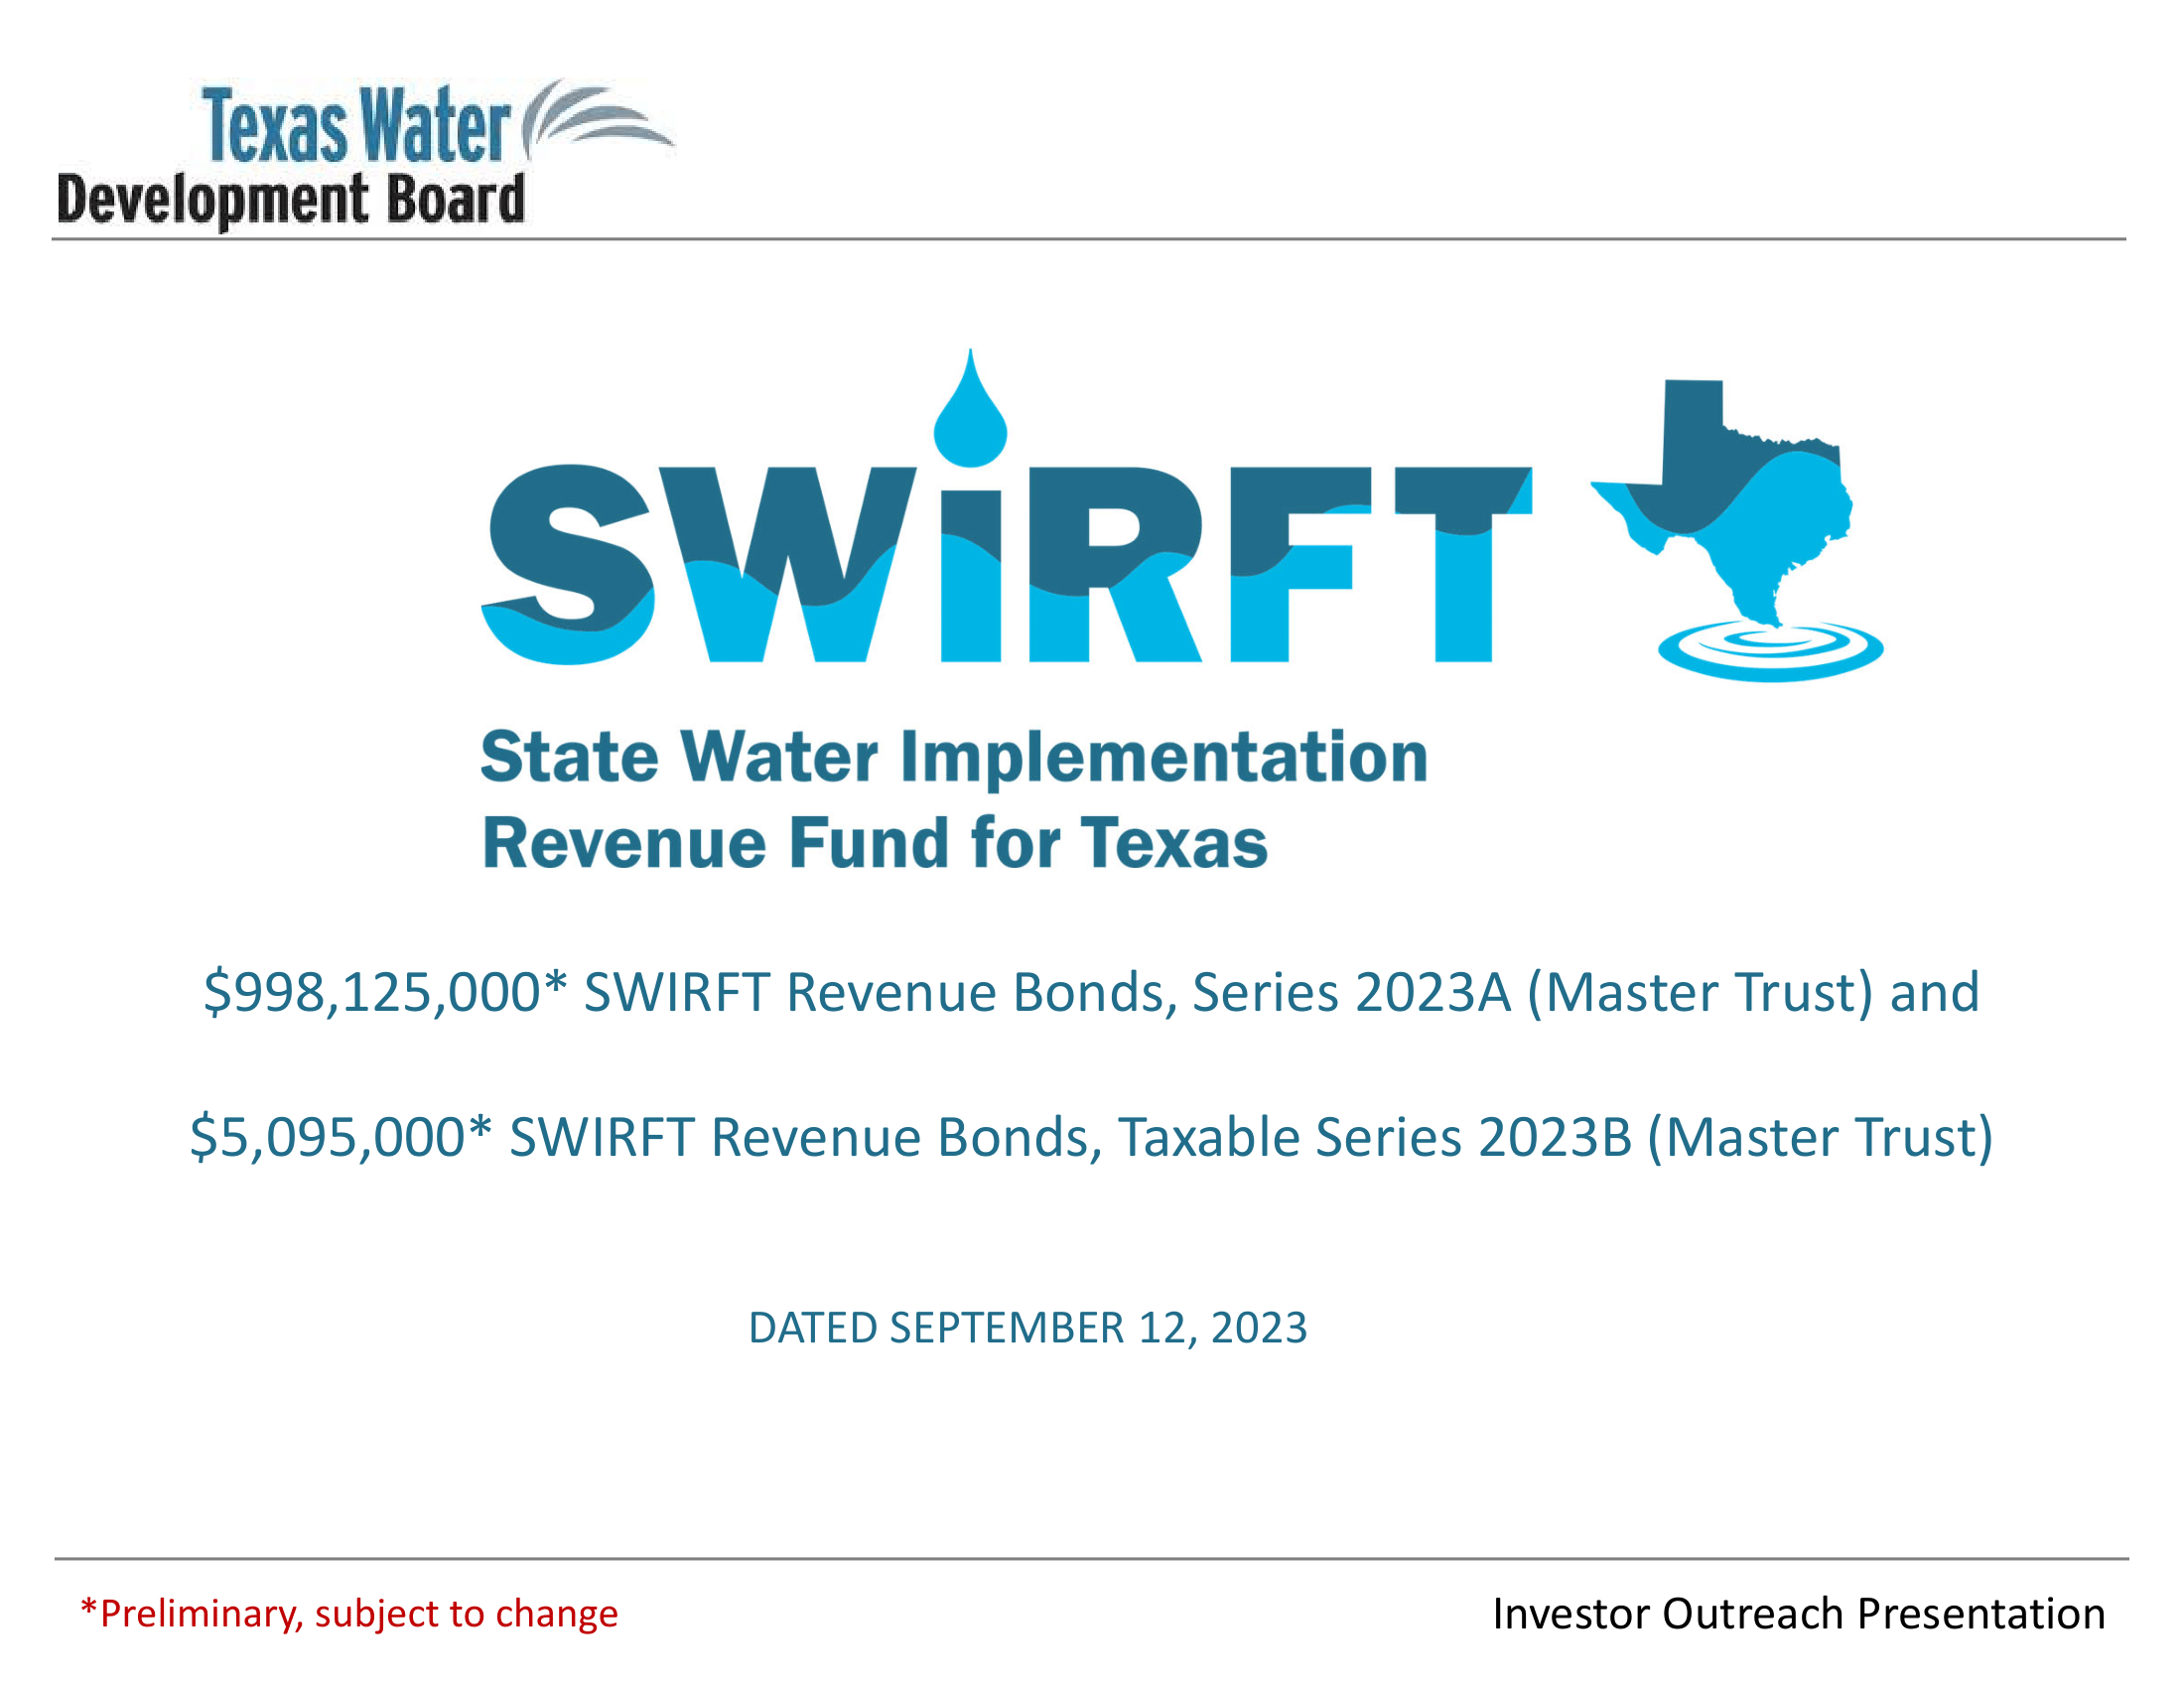 State Water Implementation Revenue Fund for Texas Revenue Bonds, Series 2023AB (Master Trust) Investor Outreach Presentation